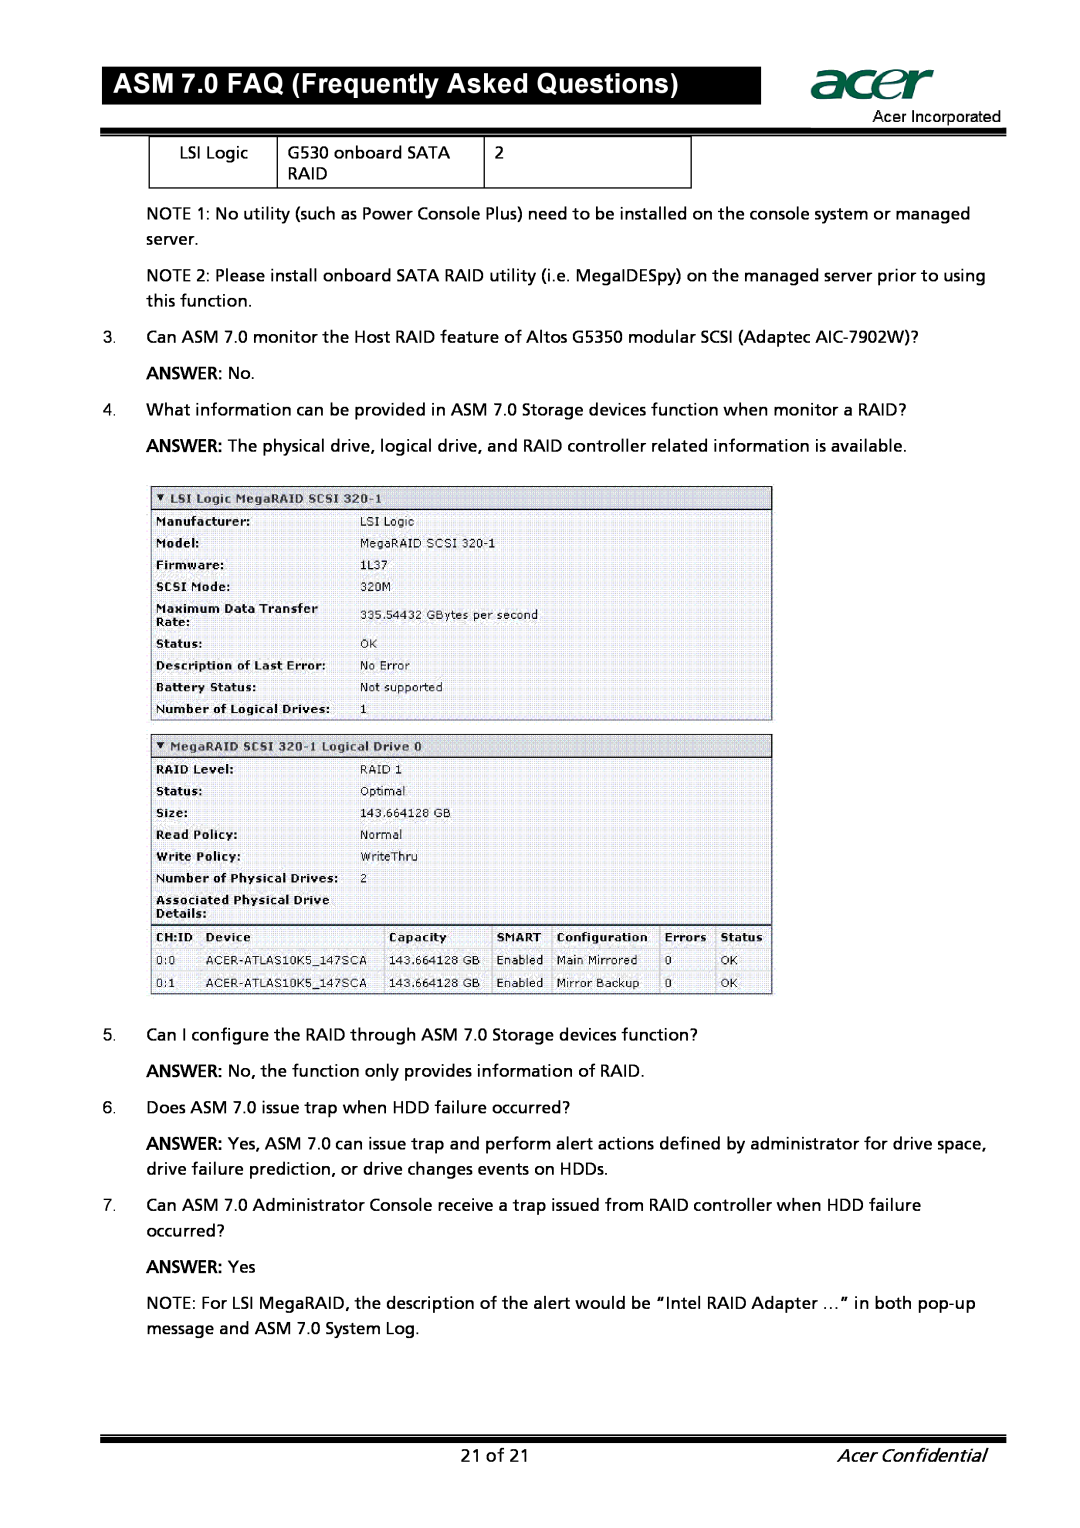 Acer manual ASM 7.0 FAQ Frequently Asked Questions, LSI Logic, ANSWER Yes, Acer Confidential 